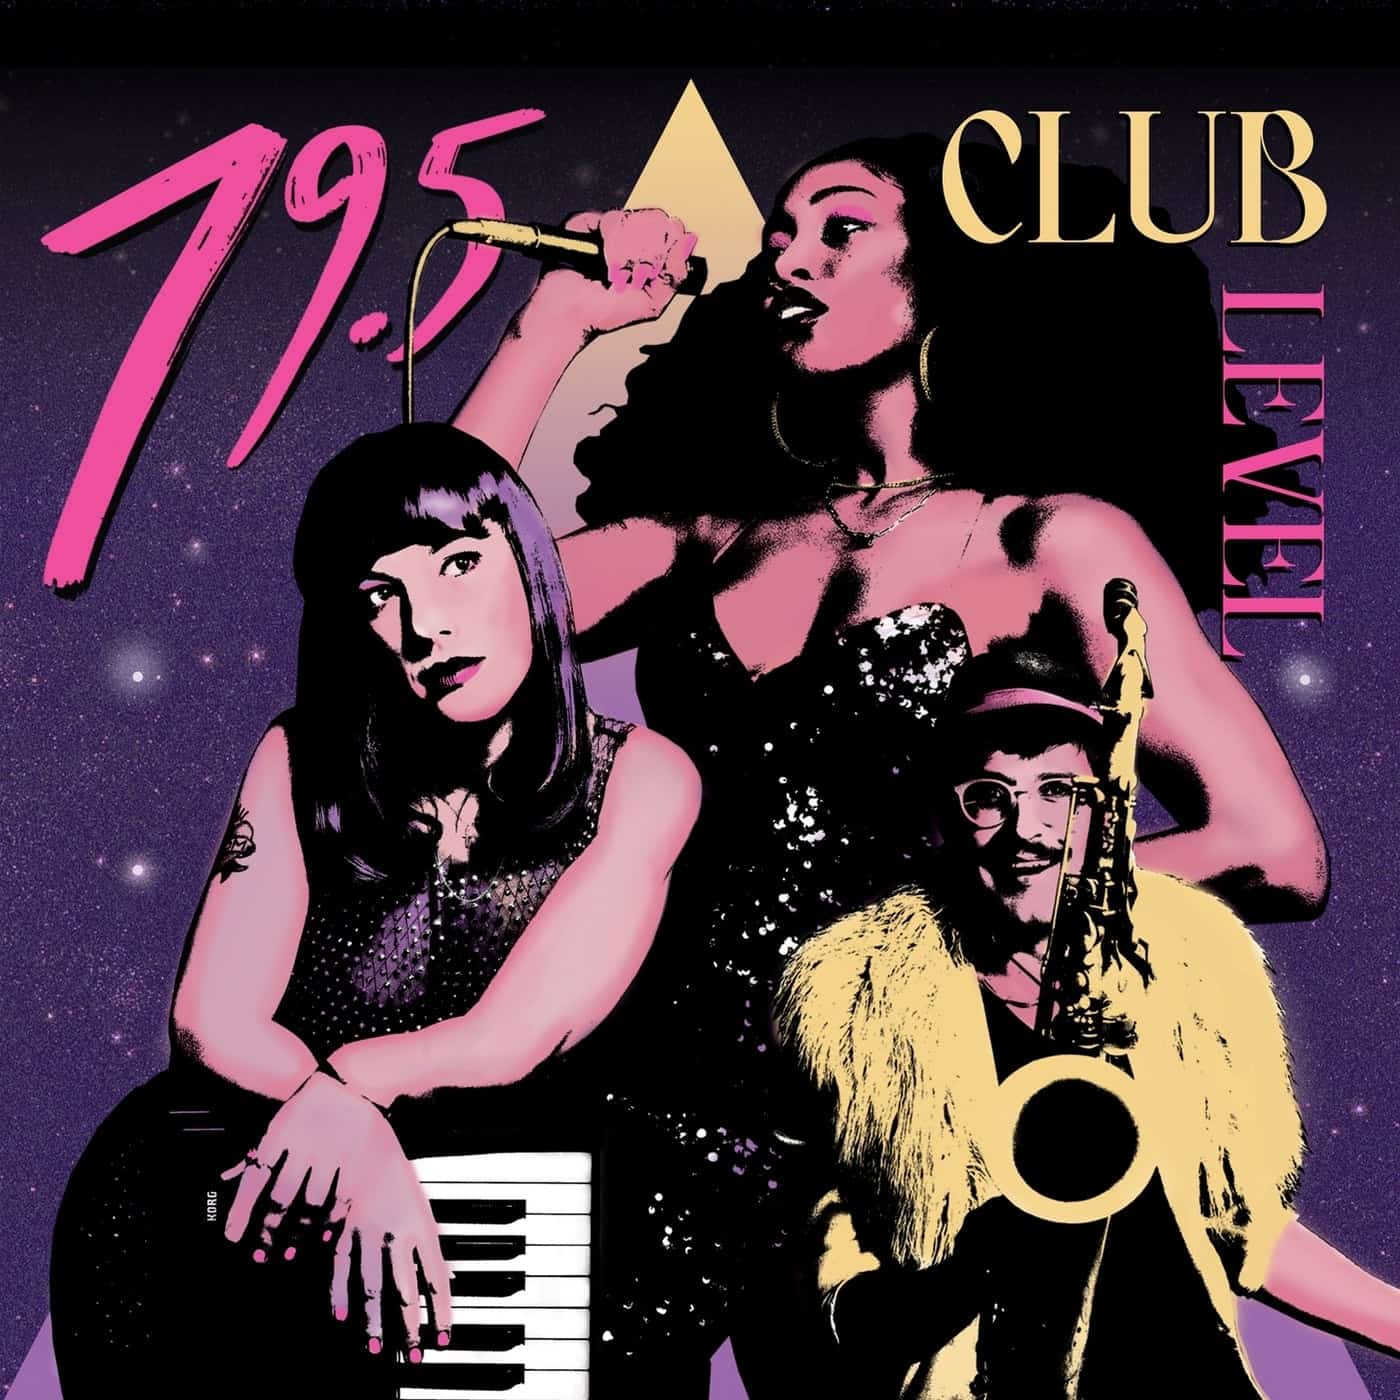 Download 79.5 - Club Level on Electrobuzz